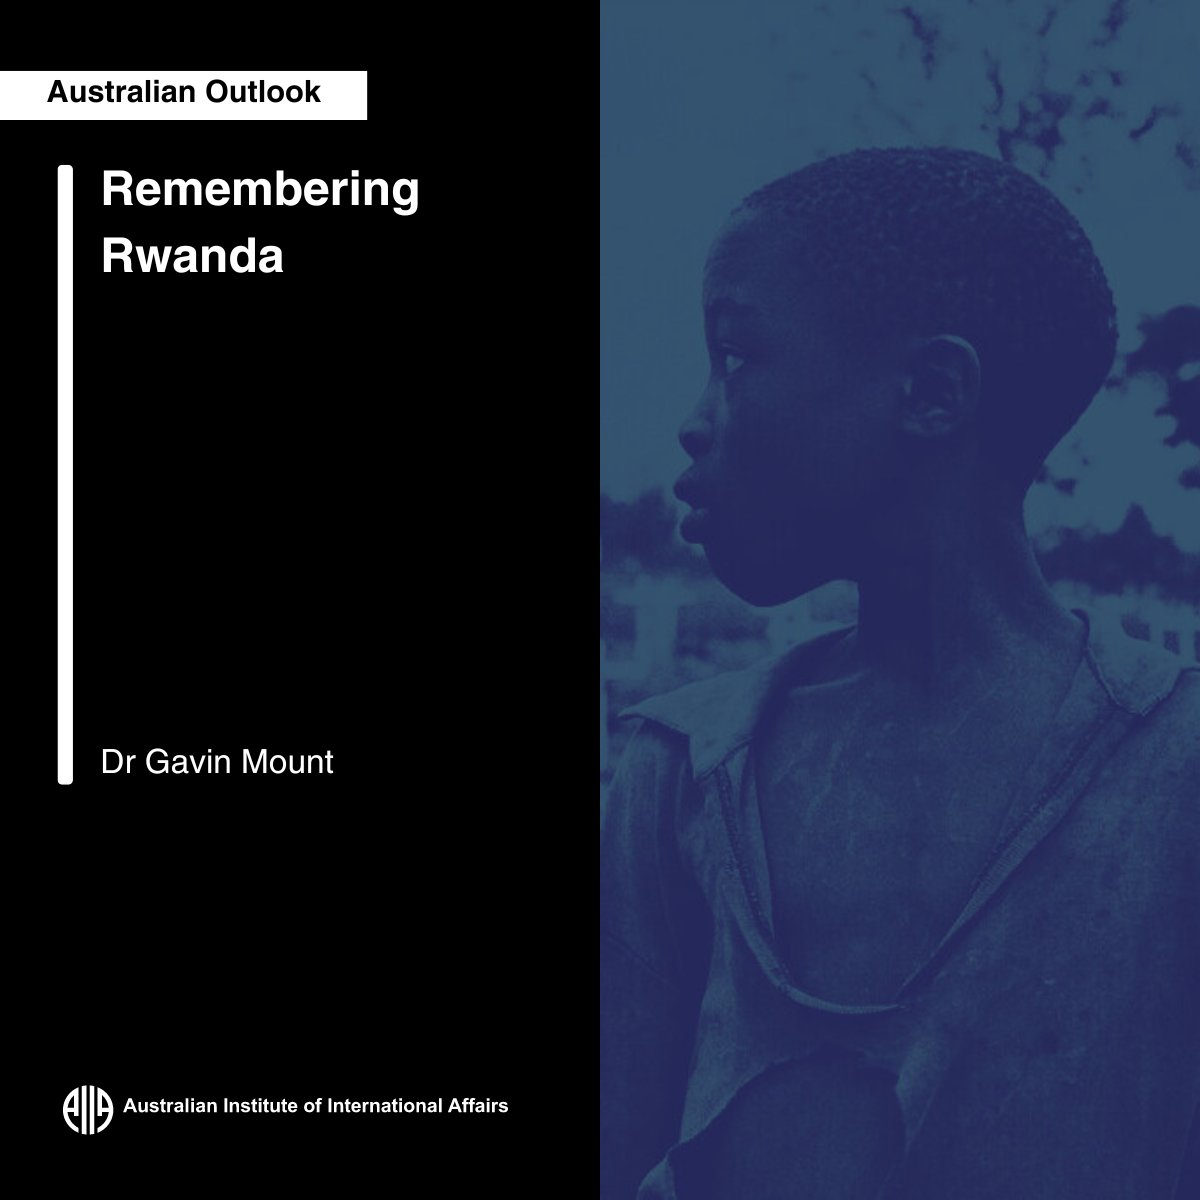 “On 7 April, commemoration ceremonies will be held in Kigali and around the world to mark the thirtieth anniversary of the Rwandan genocide,” discussed by Dr Gavin Mount Read more at Australian Outlook👇 ow.ly/4MBk50R8Taw